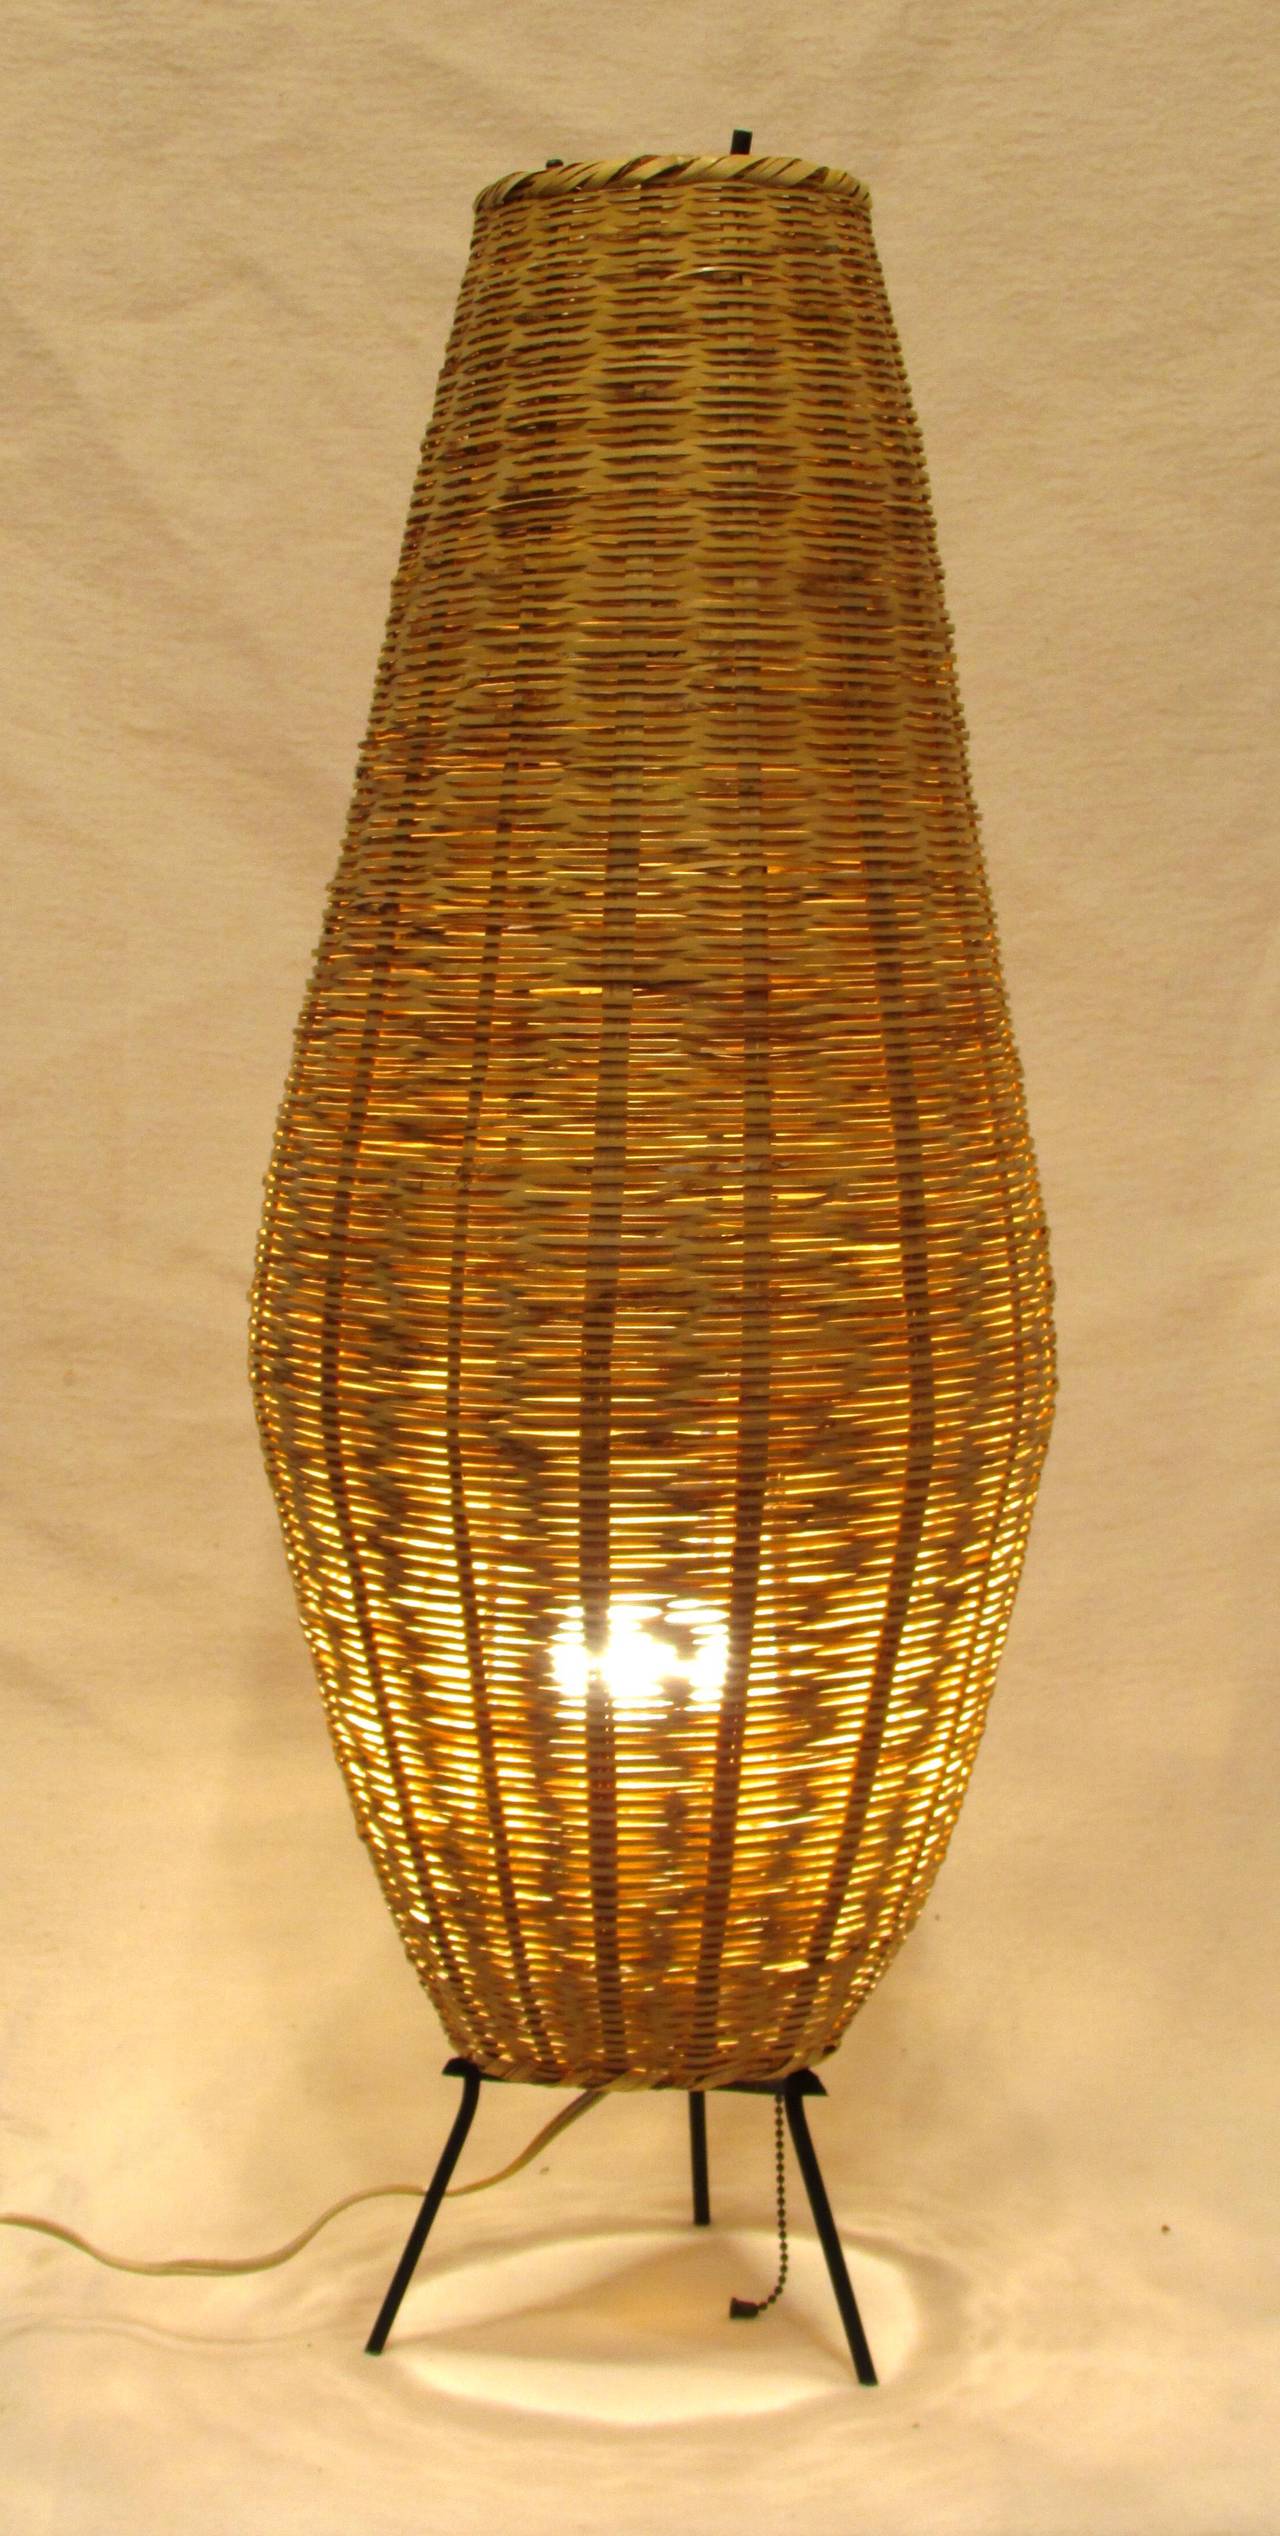 Tall oblong wicker basket over tripod metal lamp base these were made under a 1960's Peace Corp program in Ecuador using local craftsman to make scandinavian designed mid-century modern design furnishings